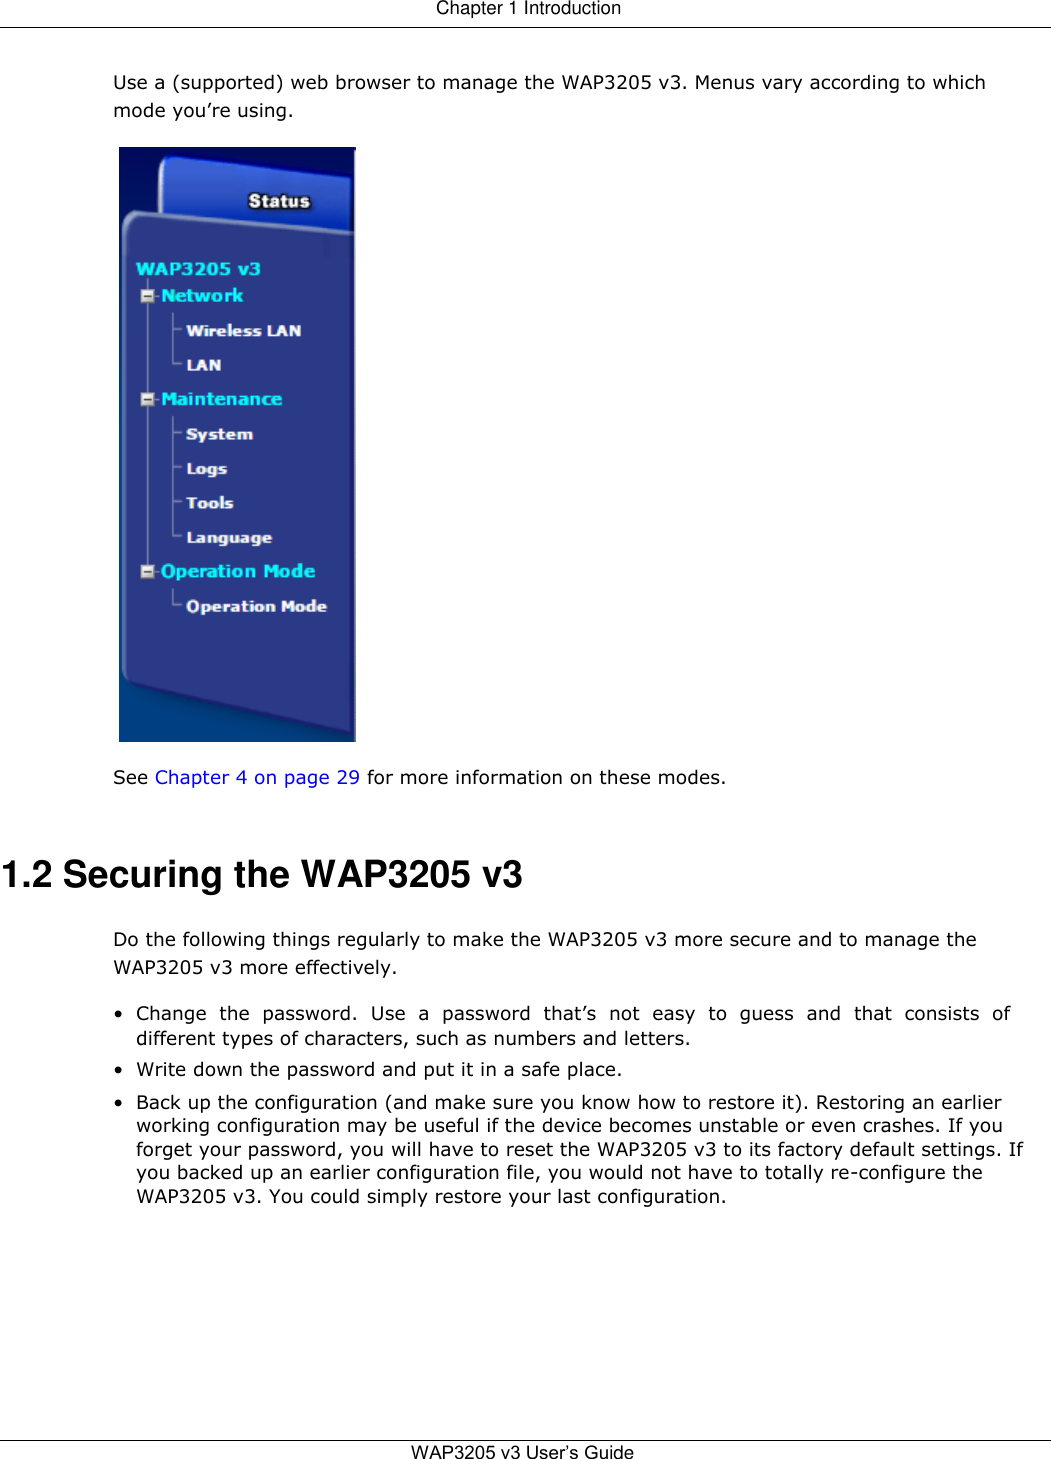 Chapter 1 Introduction   Use a (supported) web browser to manage the WAP3205 v3. Menus vary according to which mode you’re using.      See Chapter 4 on page 29 for more information on these modes.    1.2 Securing the WAP3205 v3  Do the following things regularly to make the WAP3205 v3 more secure and to manage the WAP3205 v3 more effectively.  • Change  the  password.  Use  a  password  that’s  not  easy  to  guess  and  that  consists  of different types of characters, such as numbers and letters.  • Write down the password and put it in a safe place.  • Back up the configuration (and make sure you know how to restore it). Restoring an earlier working configuration may be useful if the device becomes unstable or even crashes. If you forget your password, you will have to reset the WAP3205 v3 to its factory default settings. If you backed up an earlier configuration file, you would not have to totally re-configure the WAP3205 v3. You could simply restore your last configuration.            WAP3205 v3 User’s Guide   